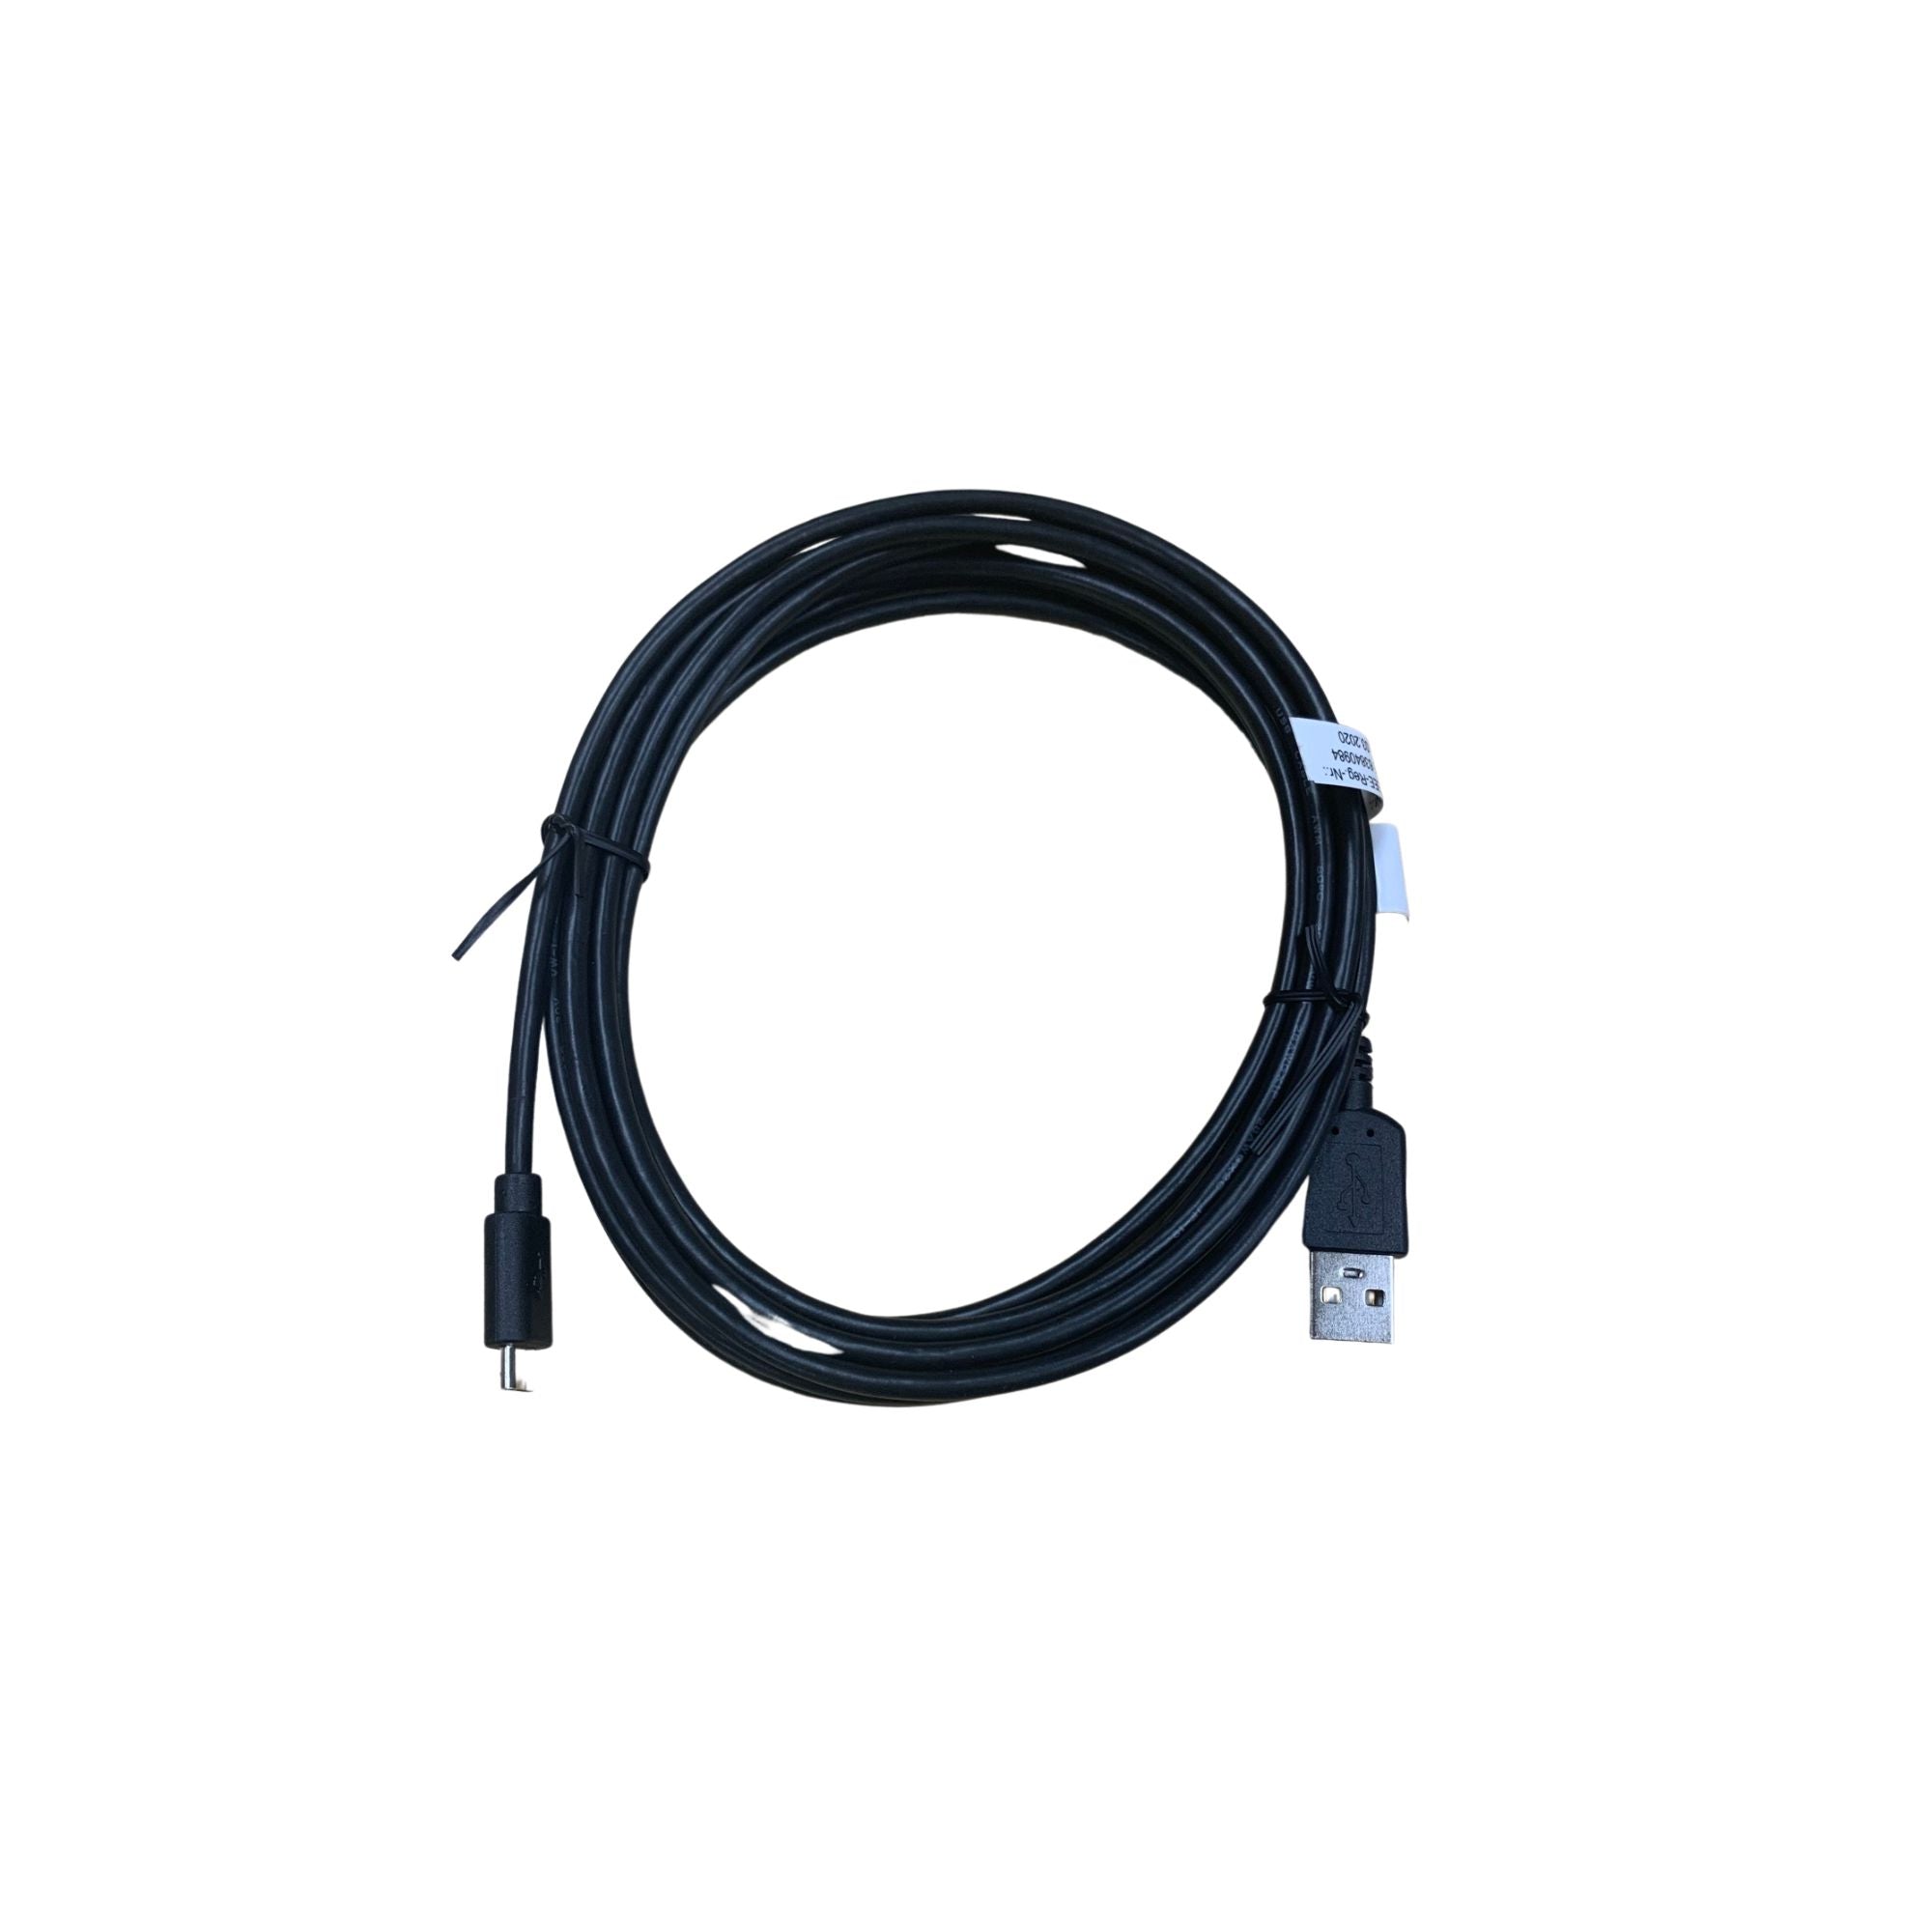 role of black cable with a micro usb on the left and a usb on the right